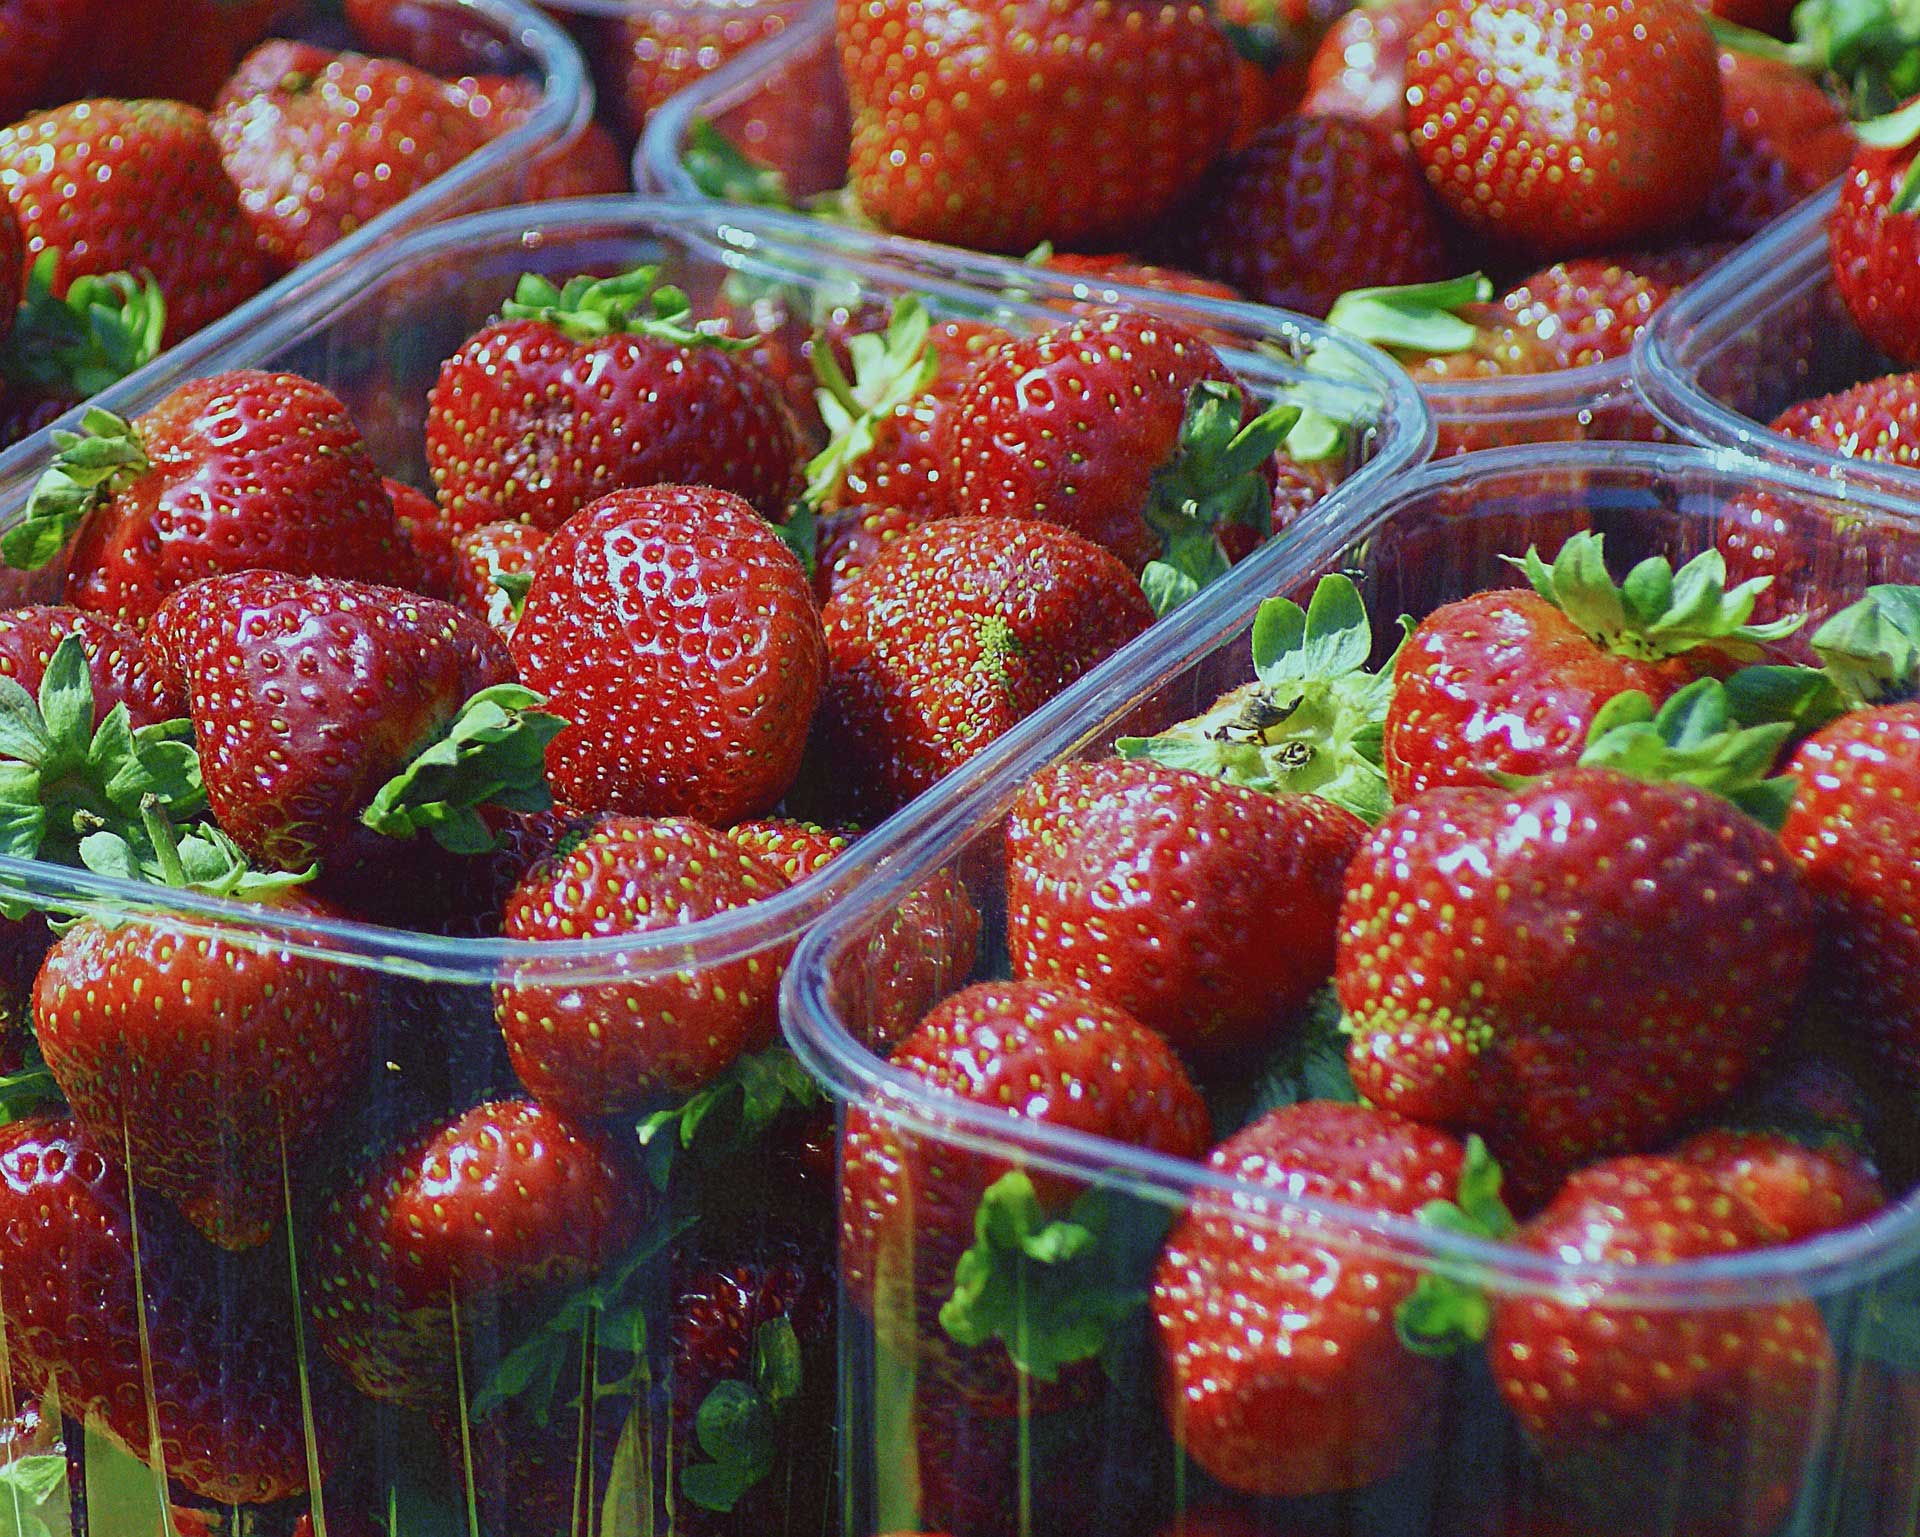 Strawberry packaging